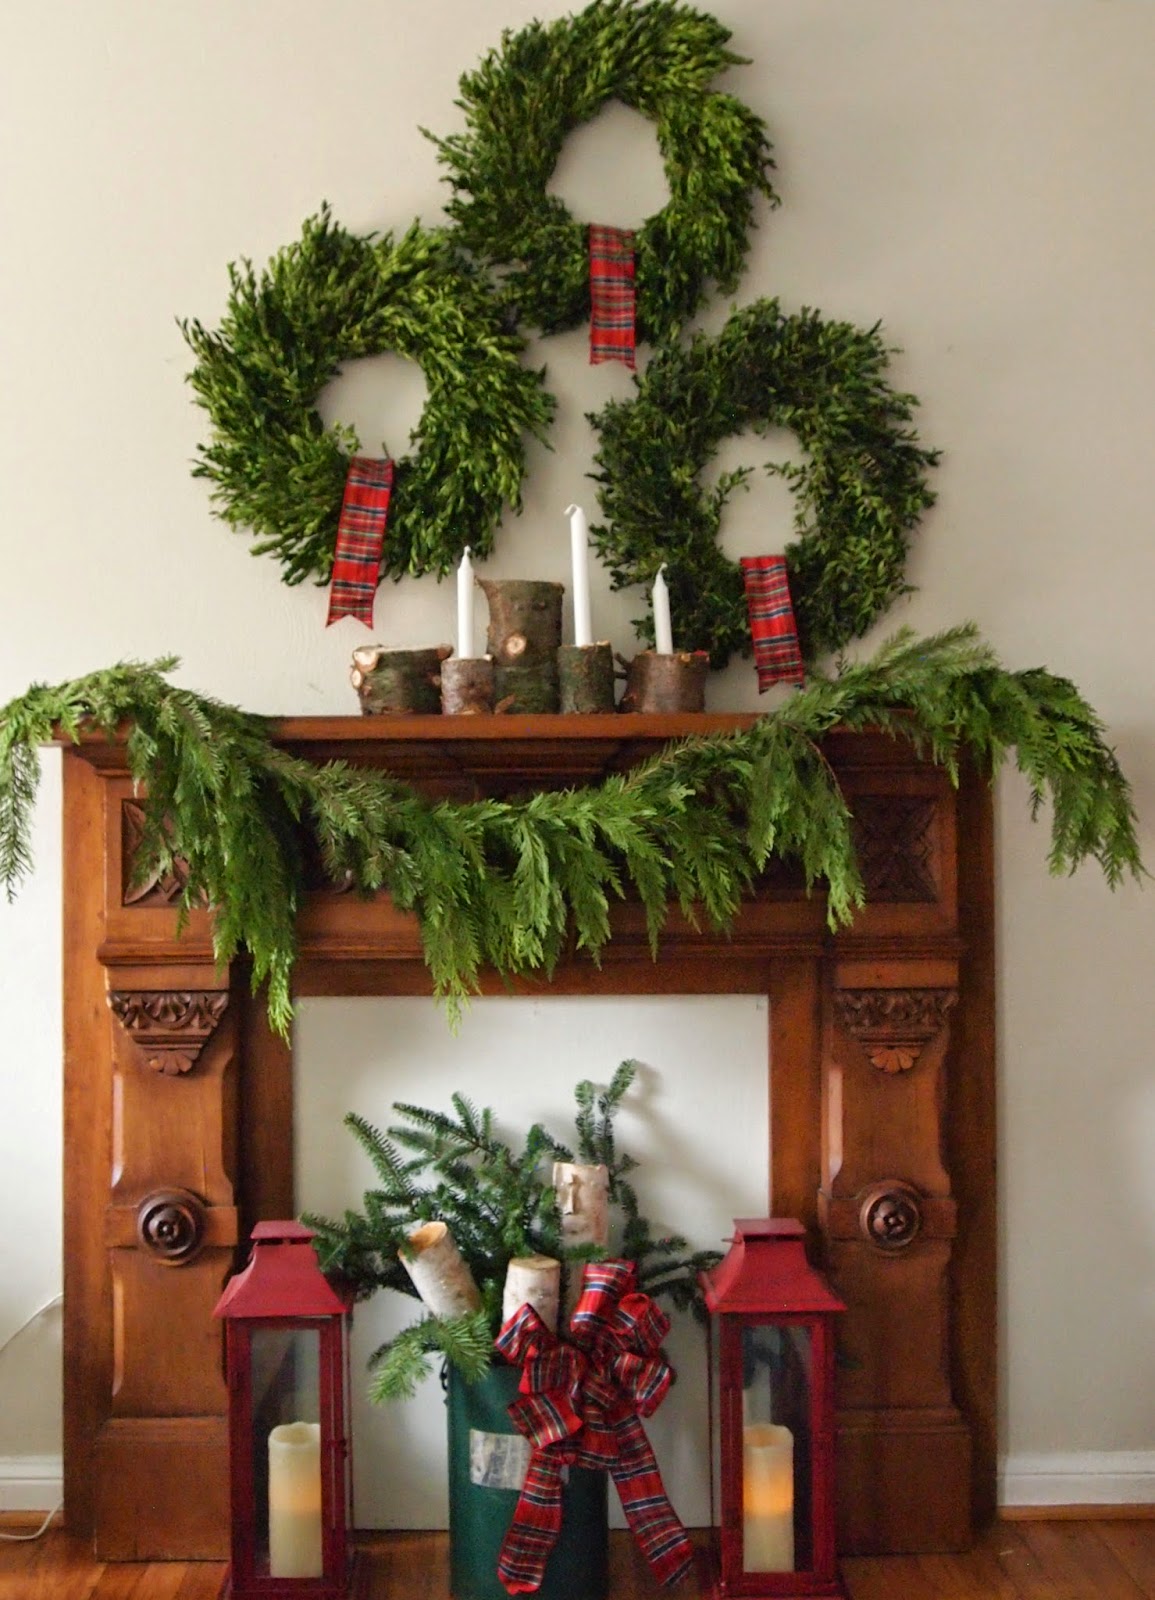 little black door: my home - 12 days of christmas tour of homes